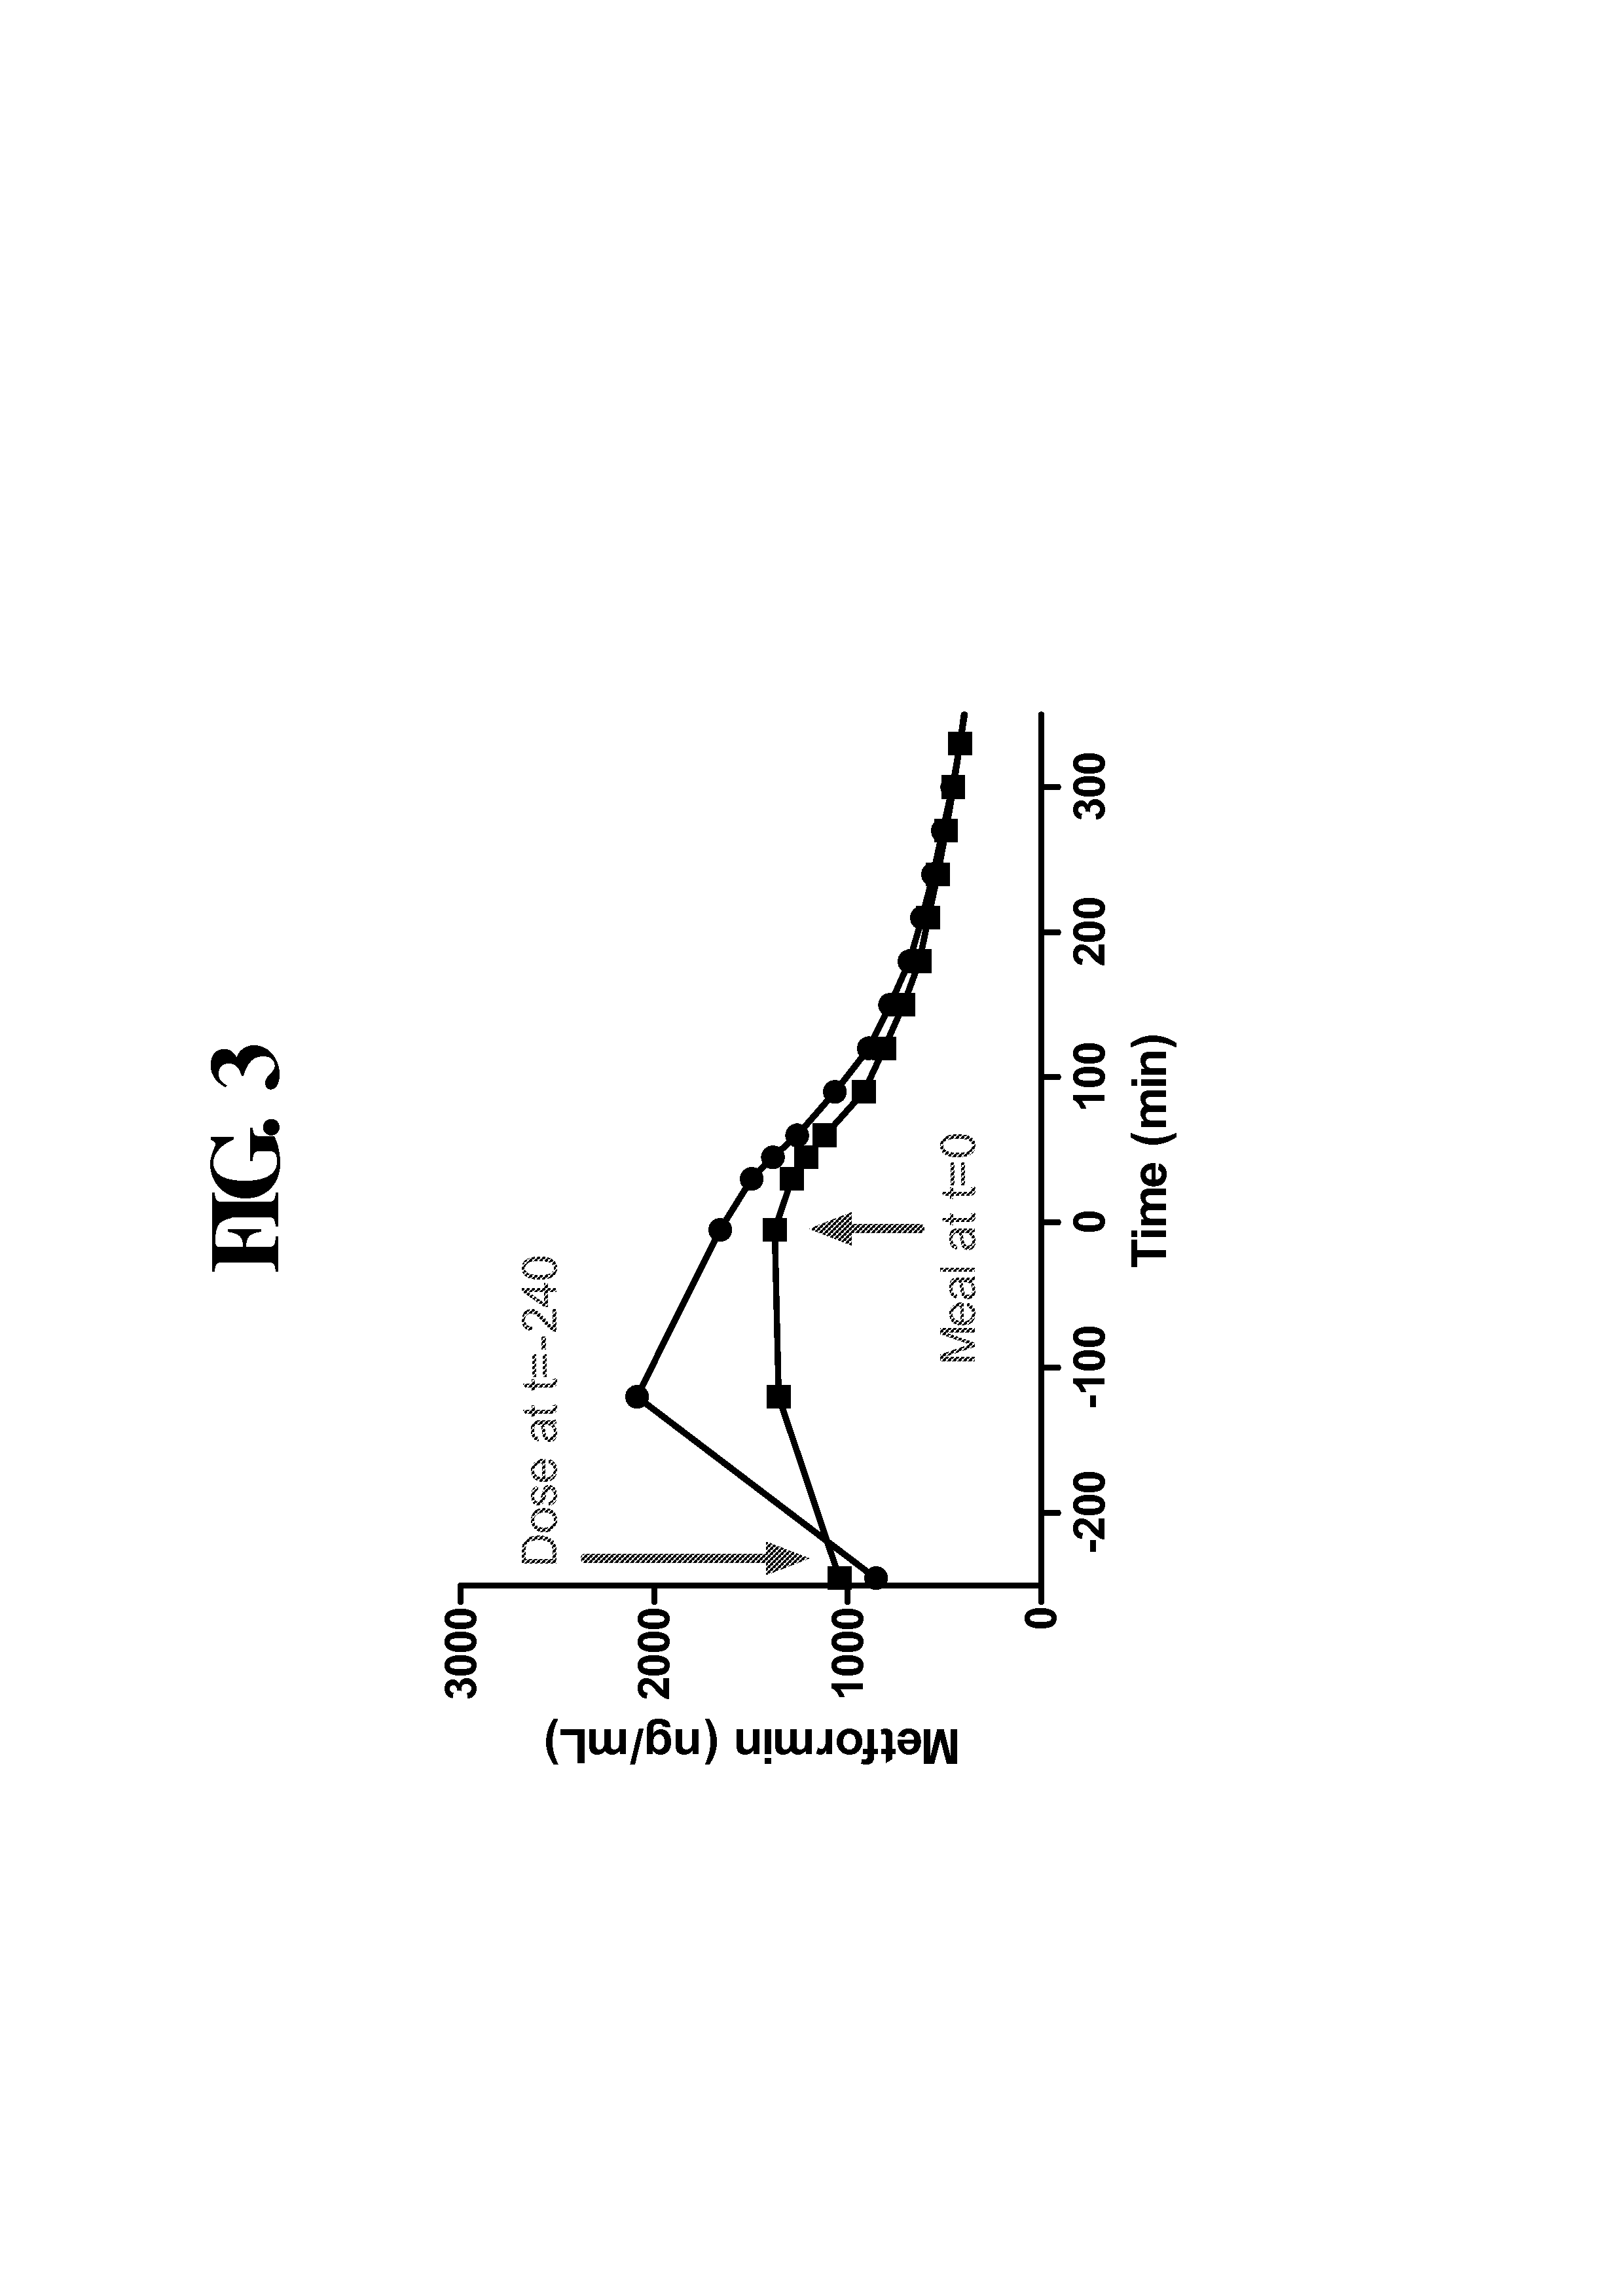 Compositions and Methods of Treating Metabolic Disorders